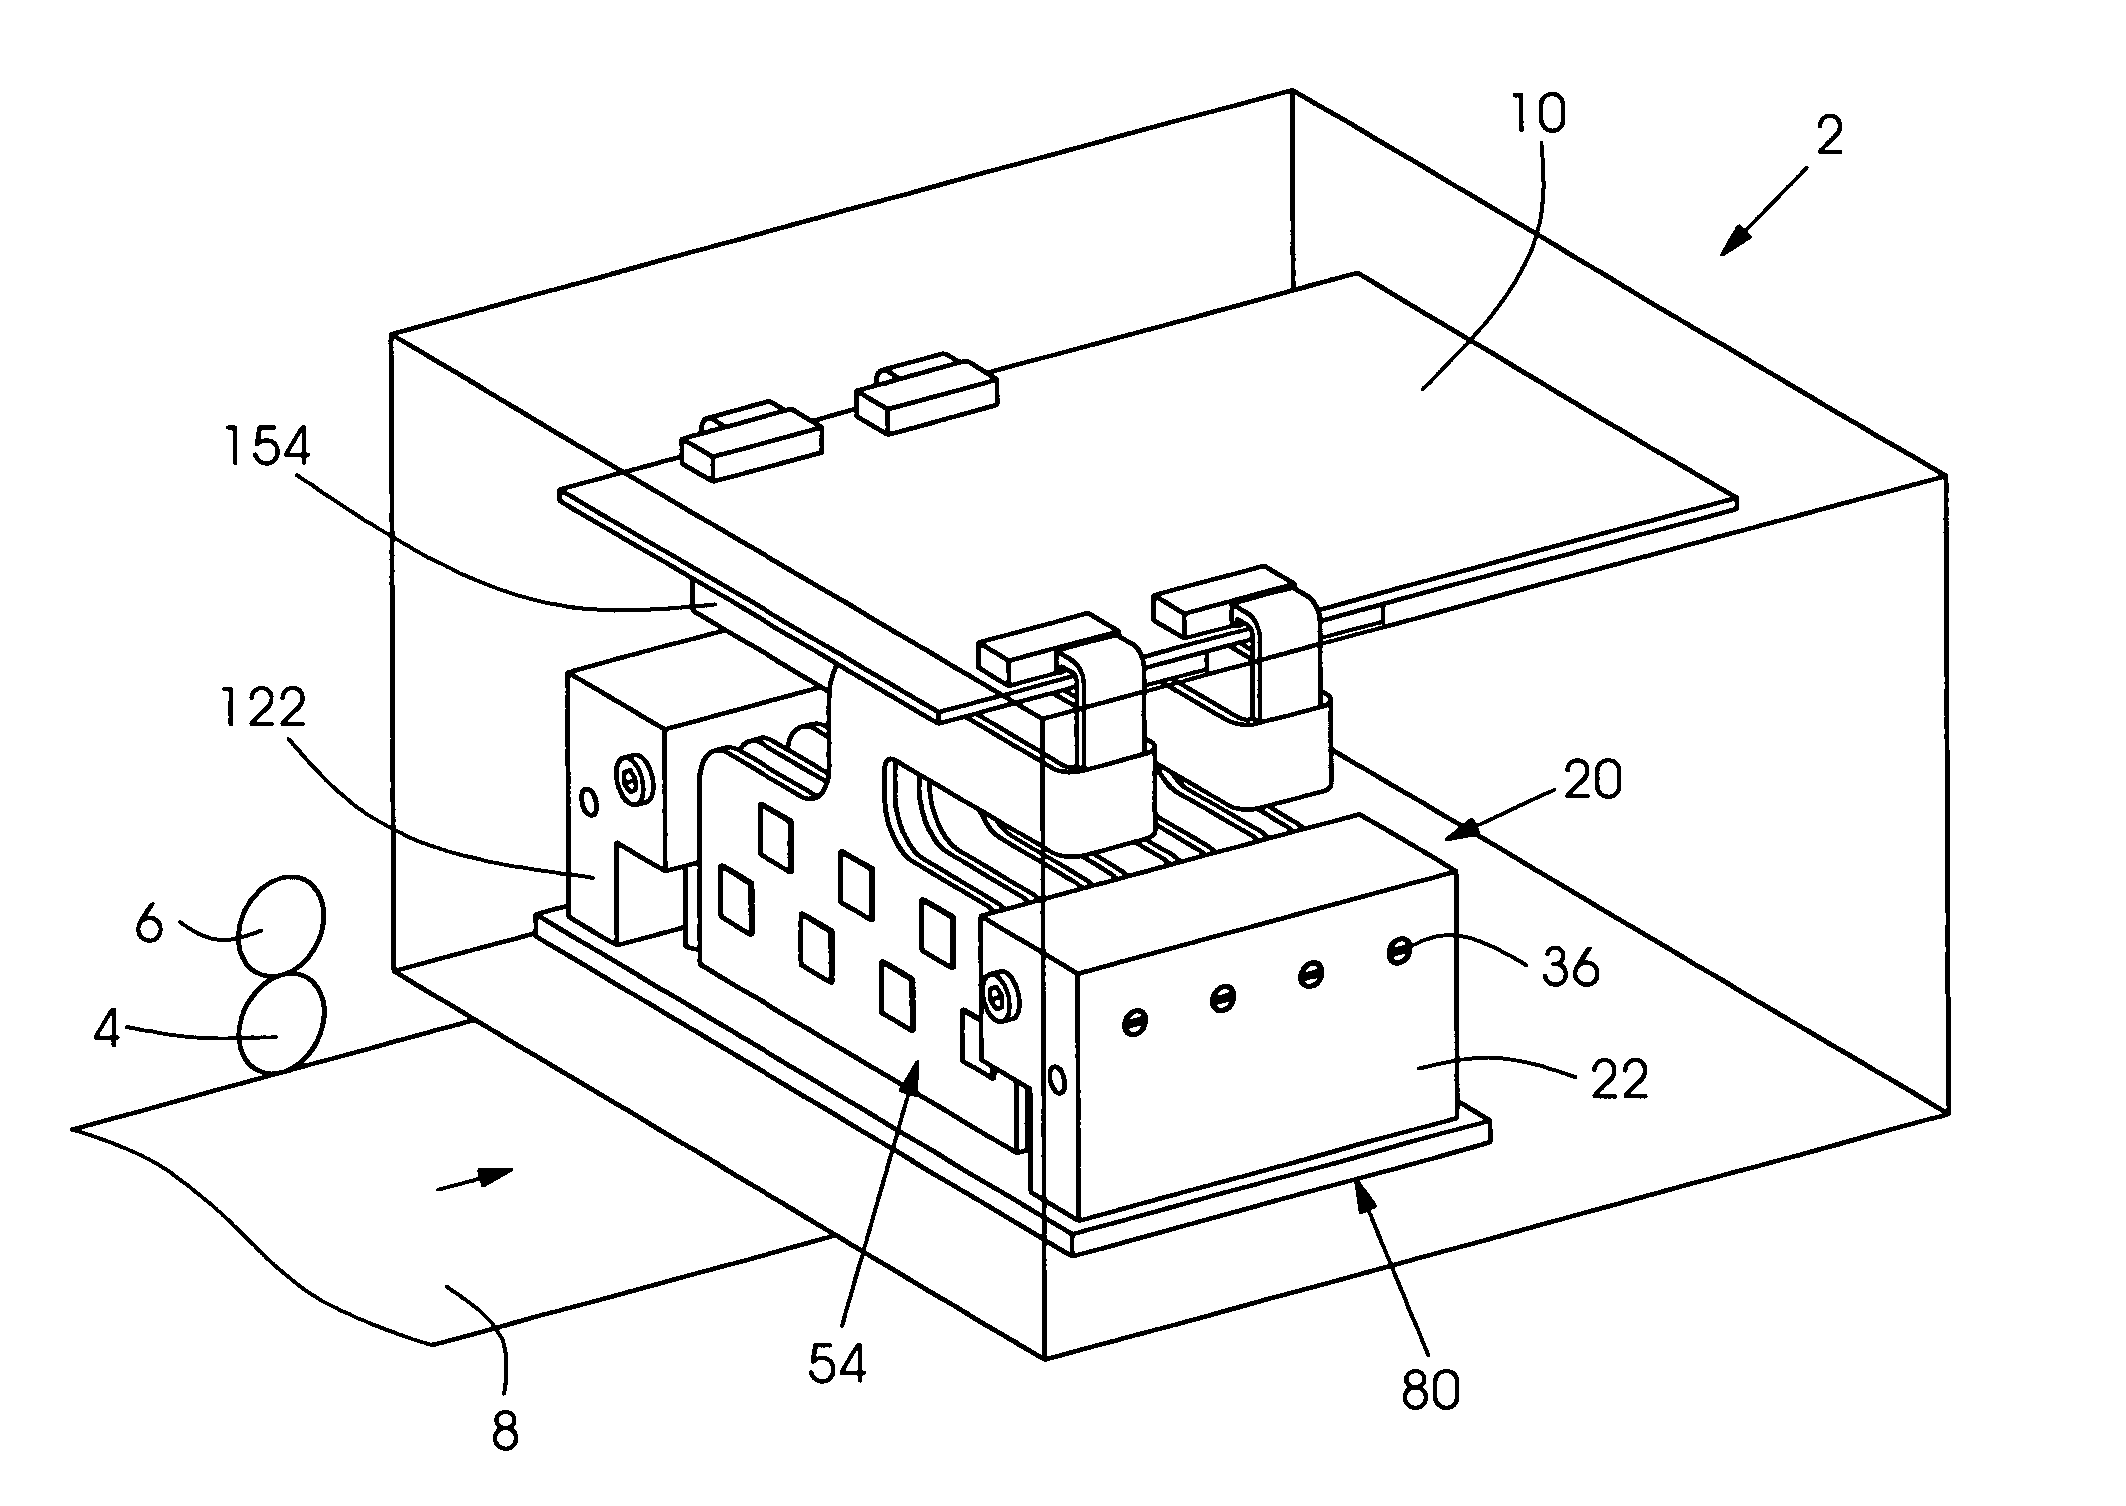 Ink jet device with individual shut-off